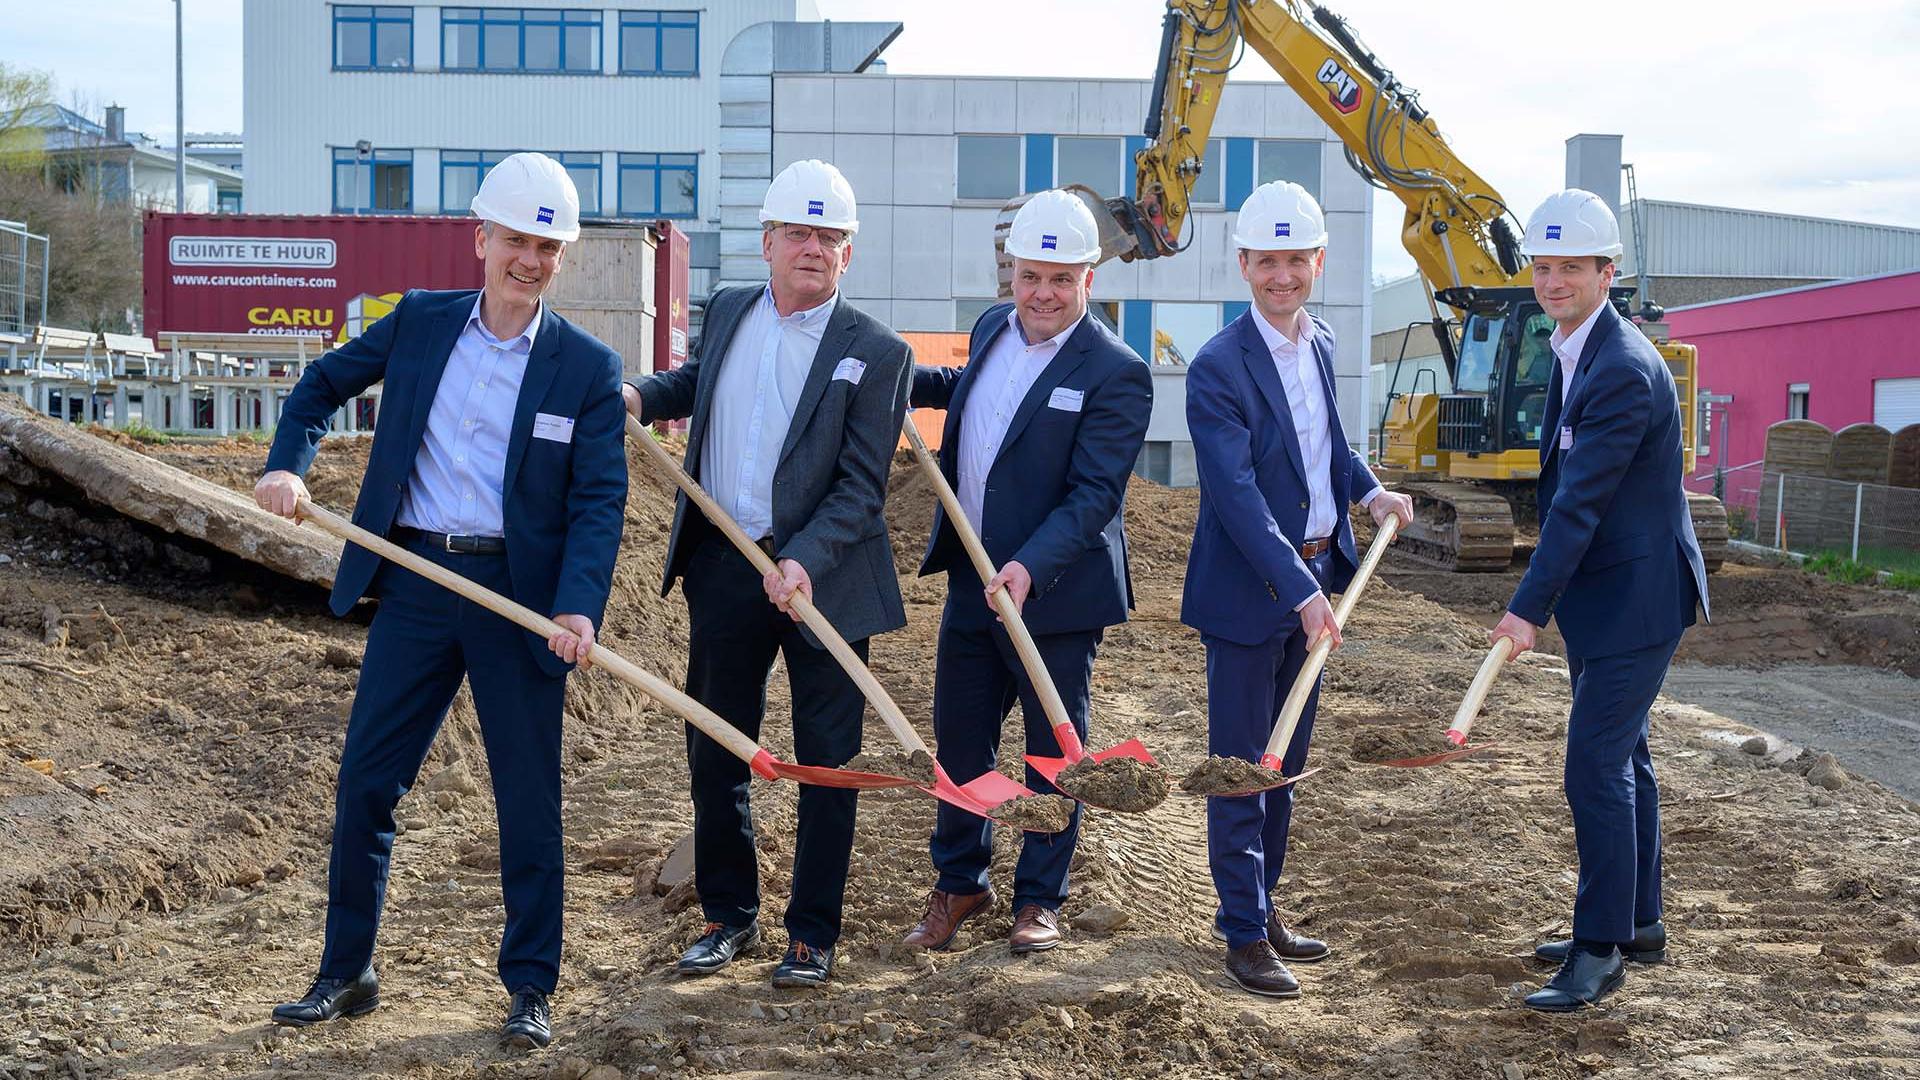 The development site in Rossdorf expands. The management is in the picture. 